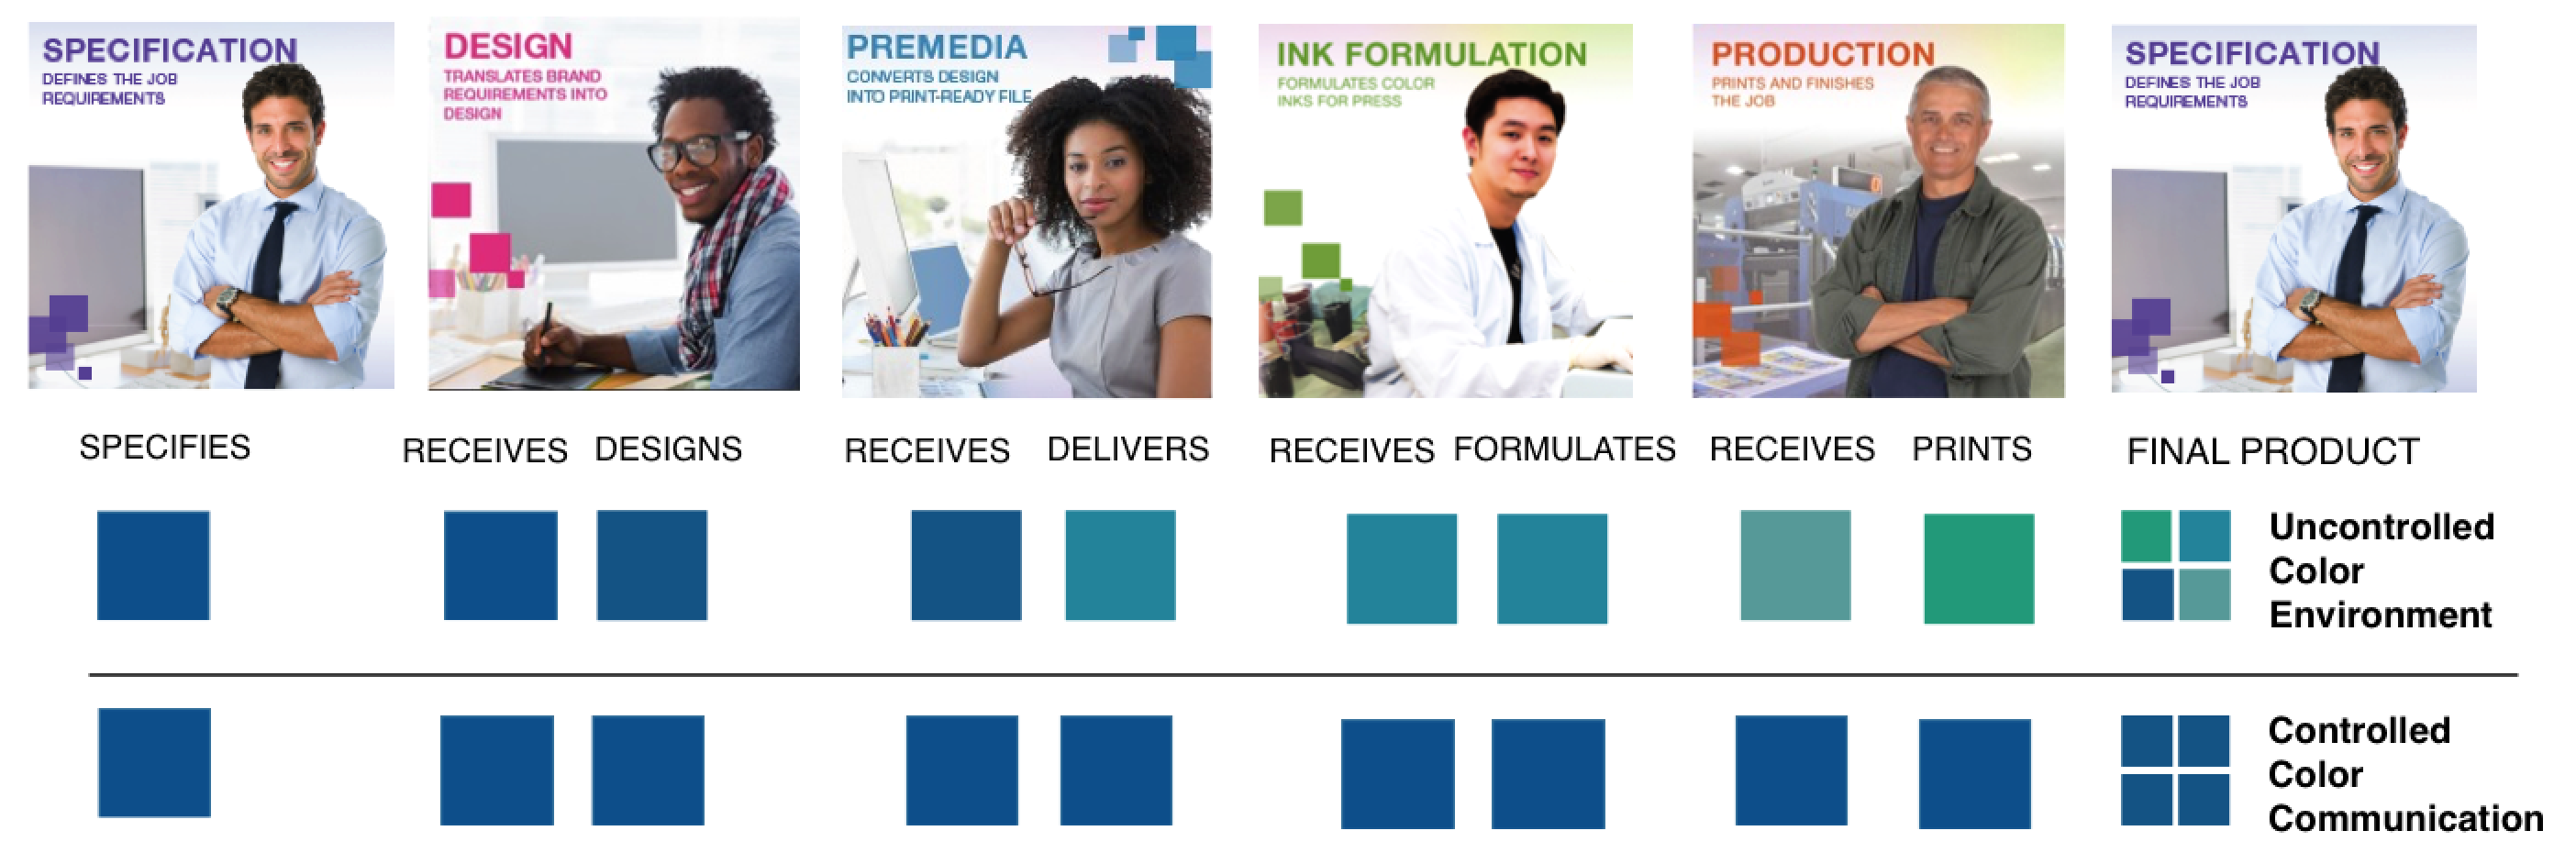 The steps of a typical printing process introduce a common and gradual change or shift in a color as it passes from person to process. PantoneLIVE simply removes the opportunity for color drift by delivering digital color data directly from the source, giving you immediate color fidelity.